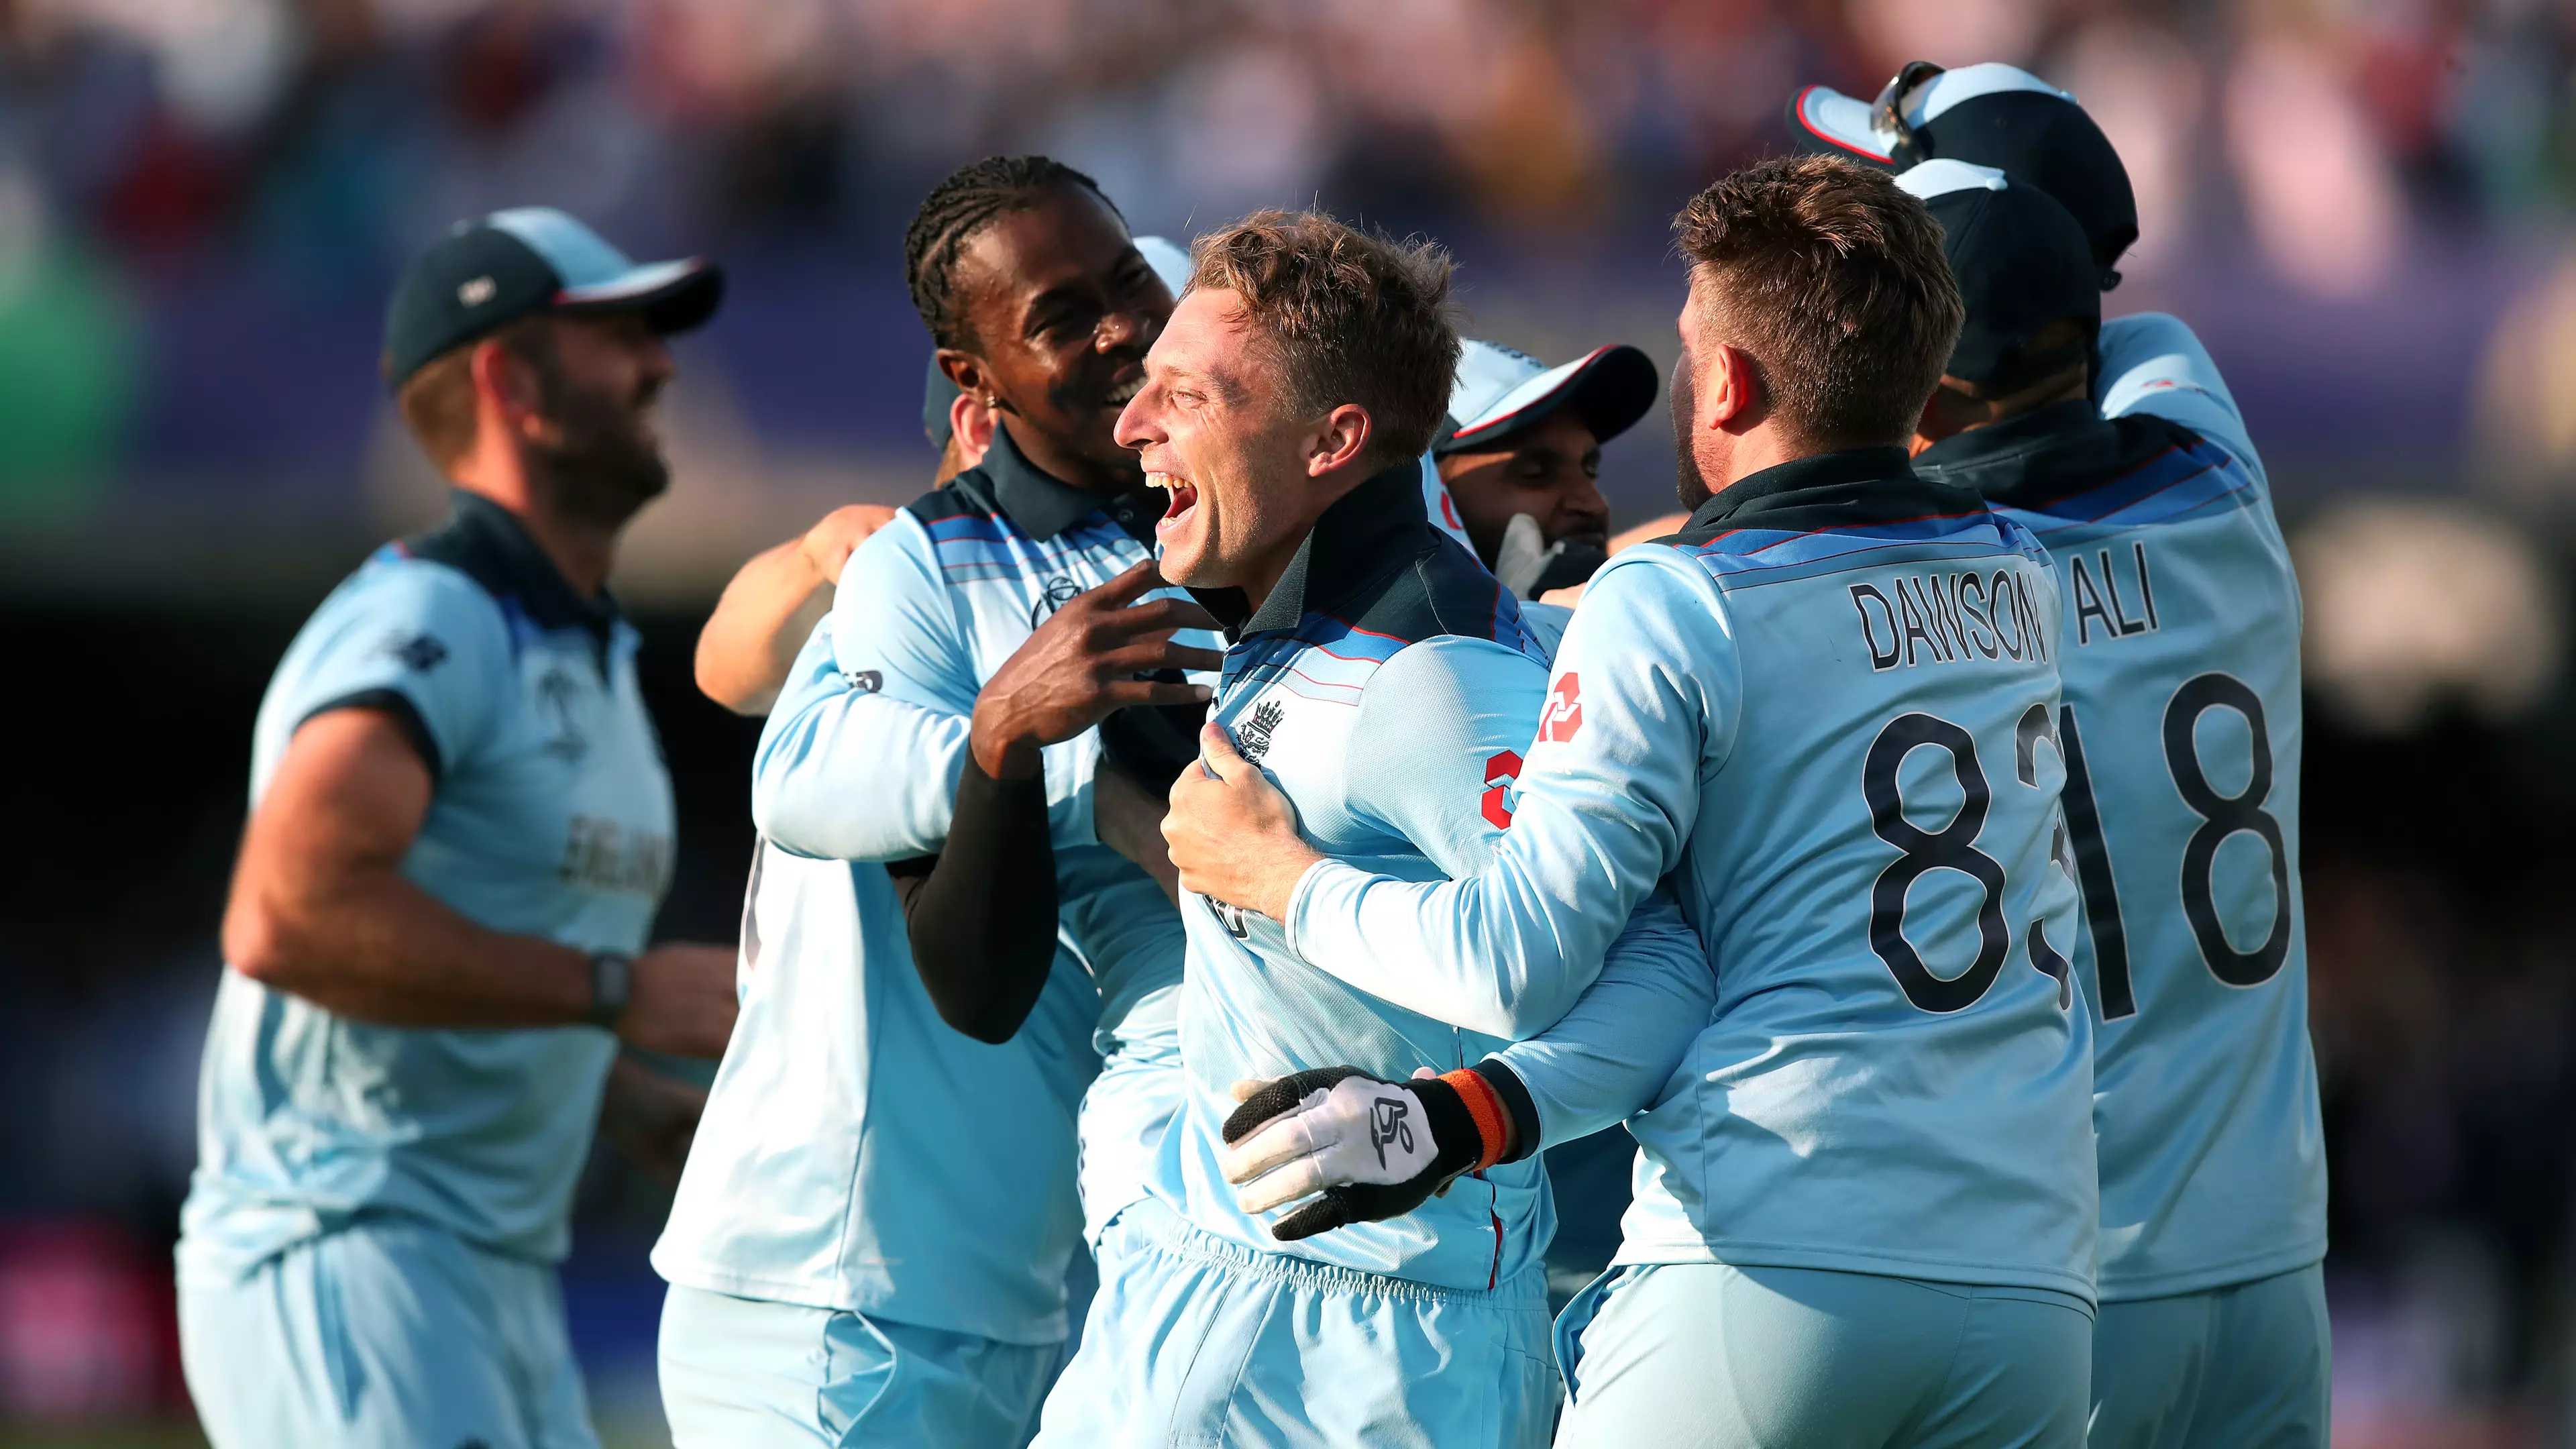 England Win Amazing Cricket World Cup Final Against New Zealand